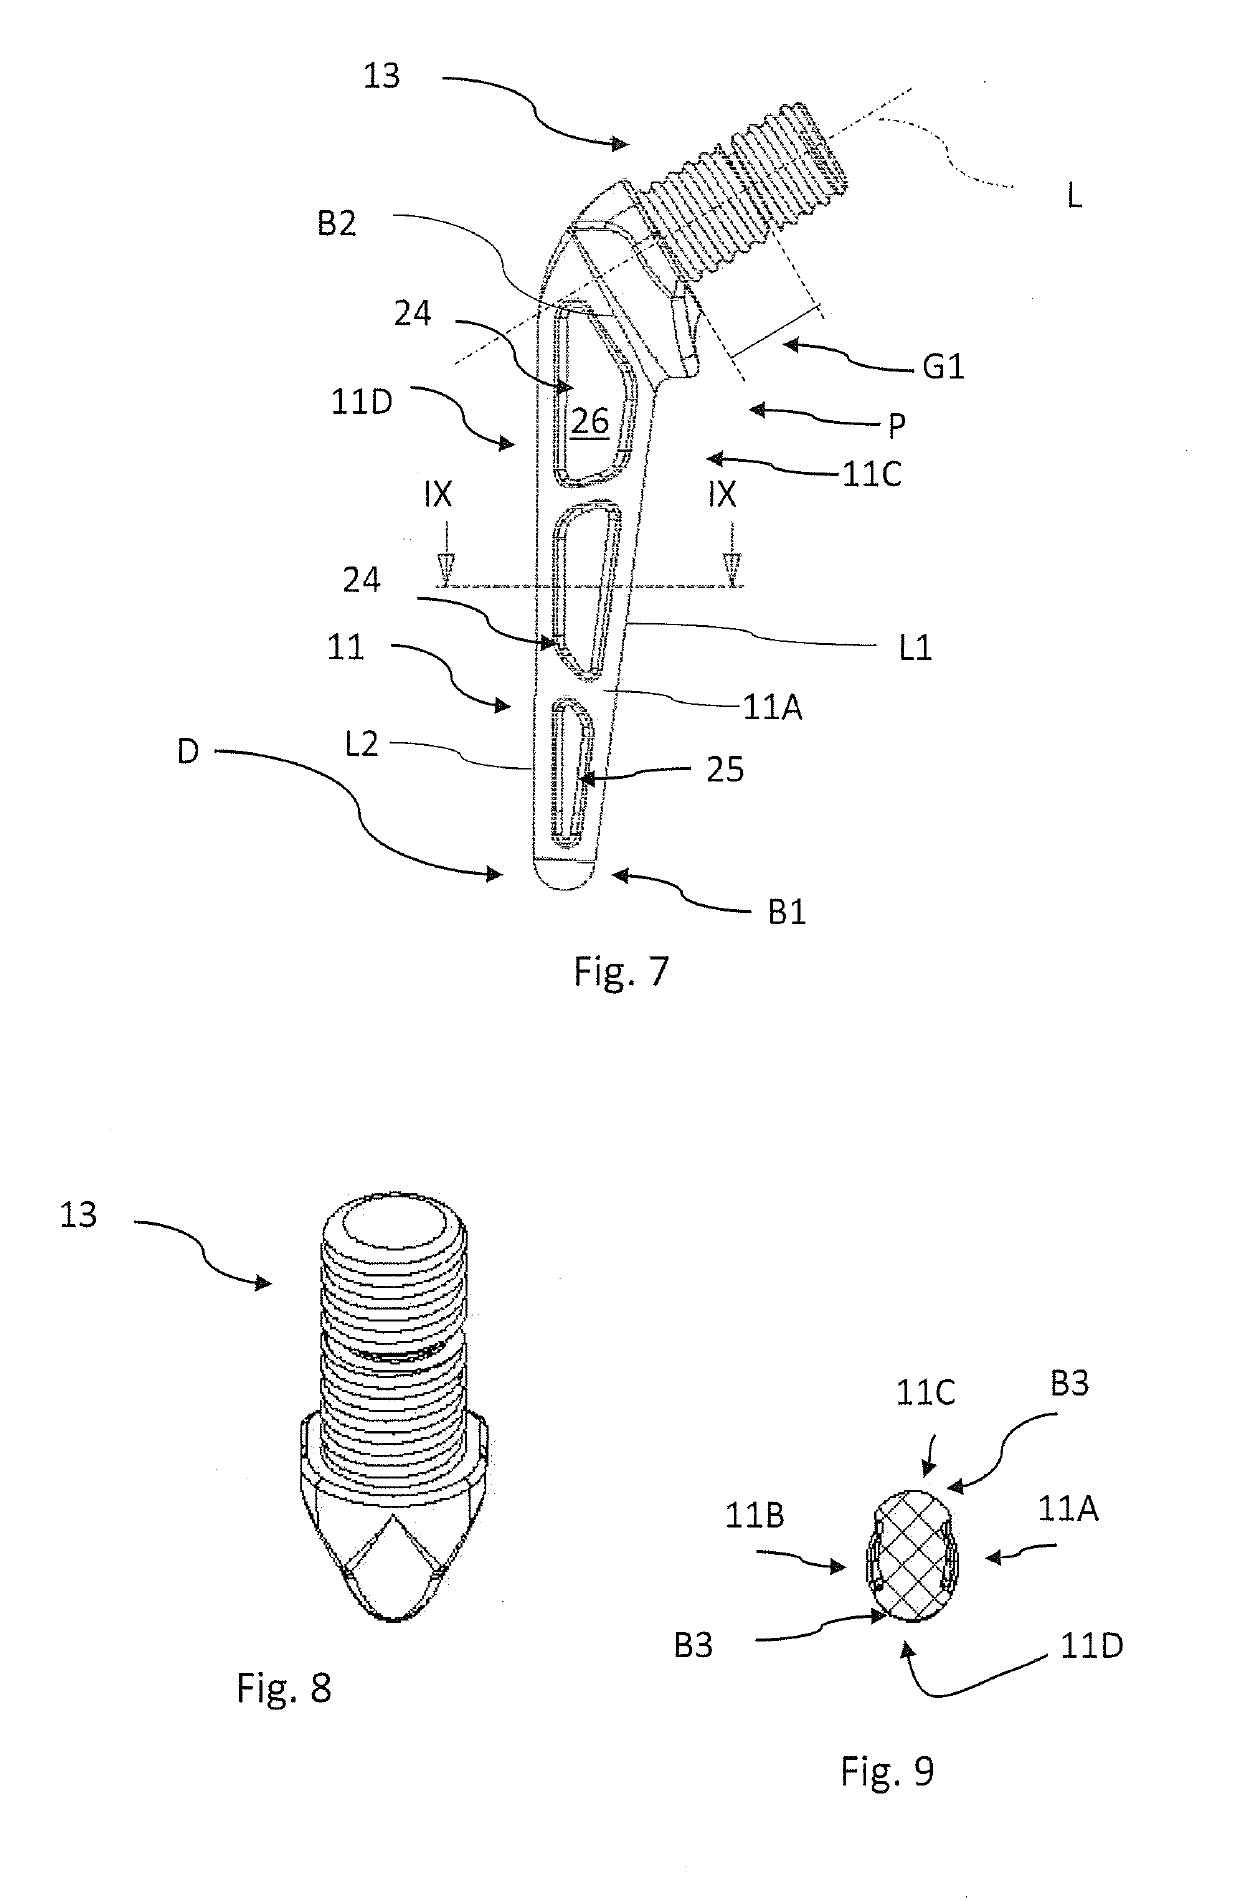 Spacer device for treating a joiny of the human body